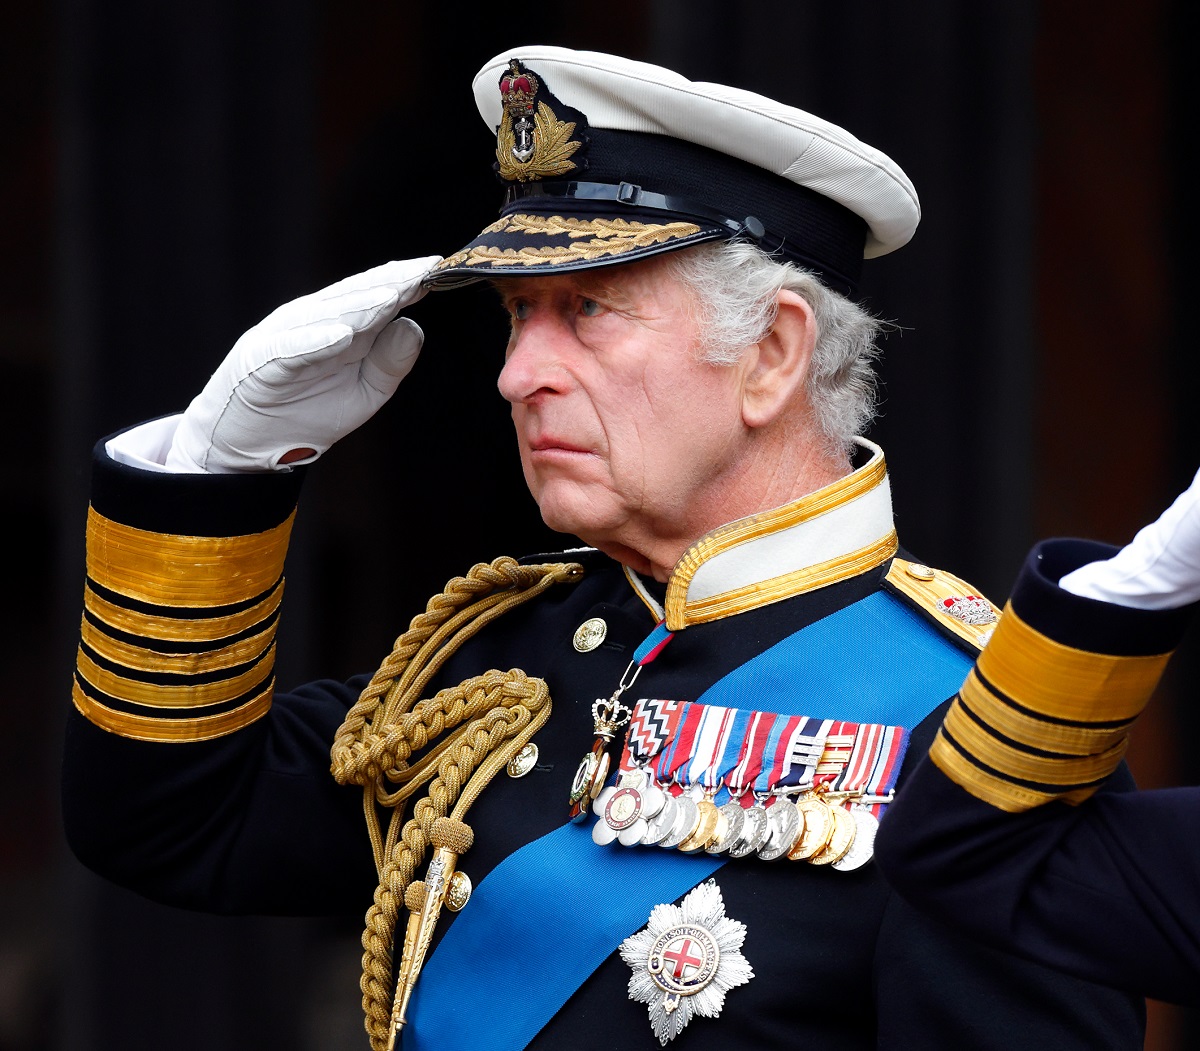 King Charles III salutes his mother Queen Elizabeth II's coffin as he attends the Committal Service